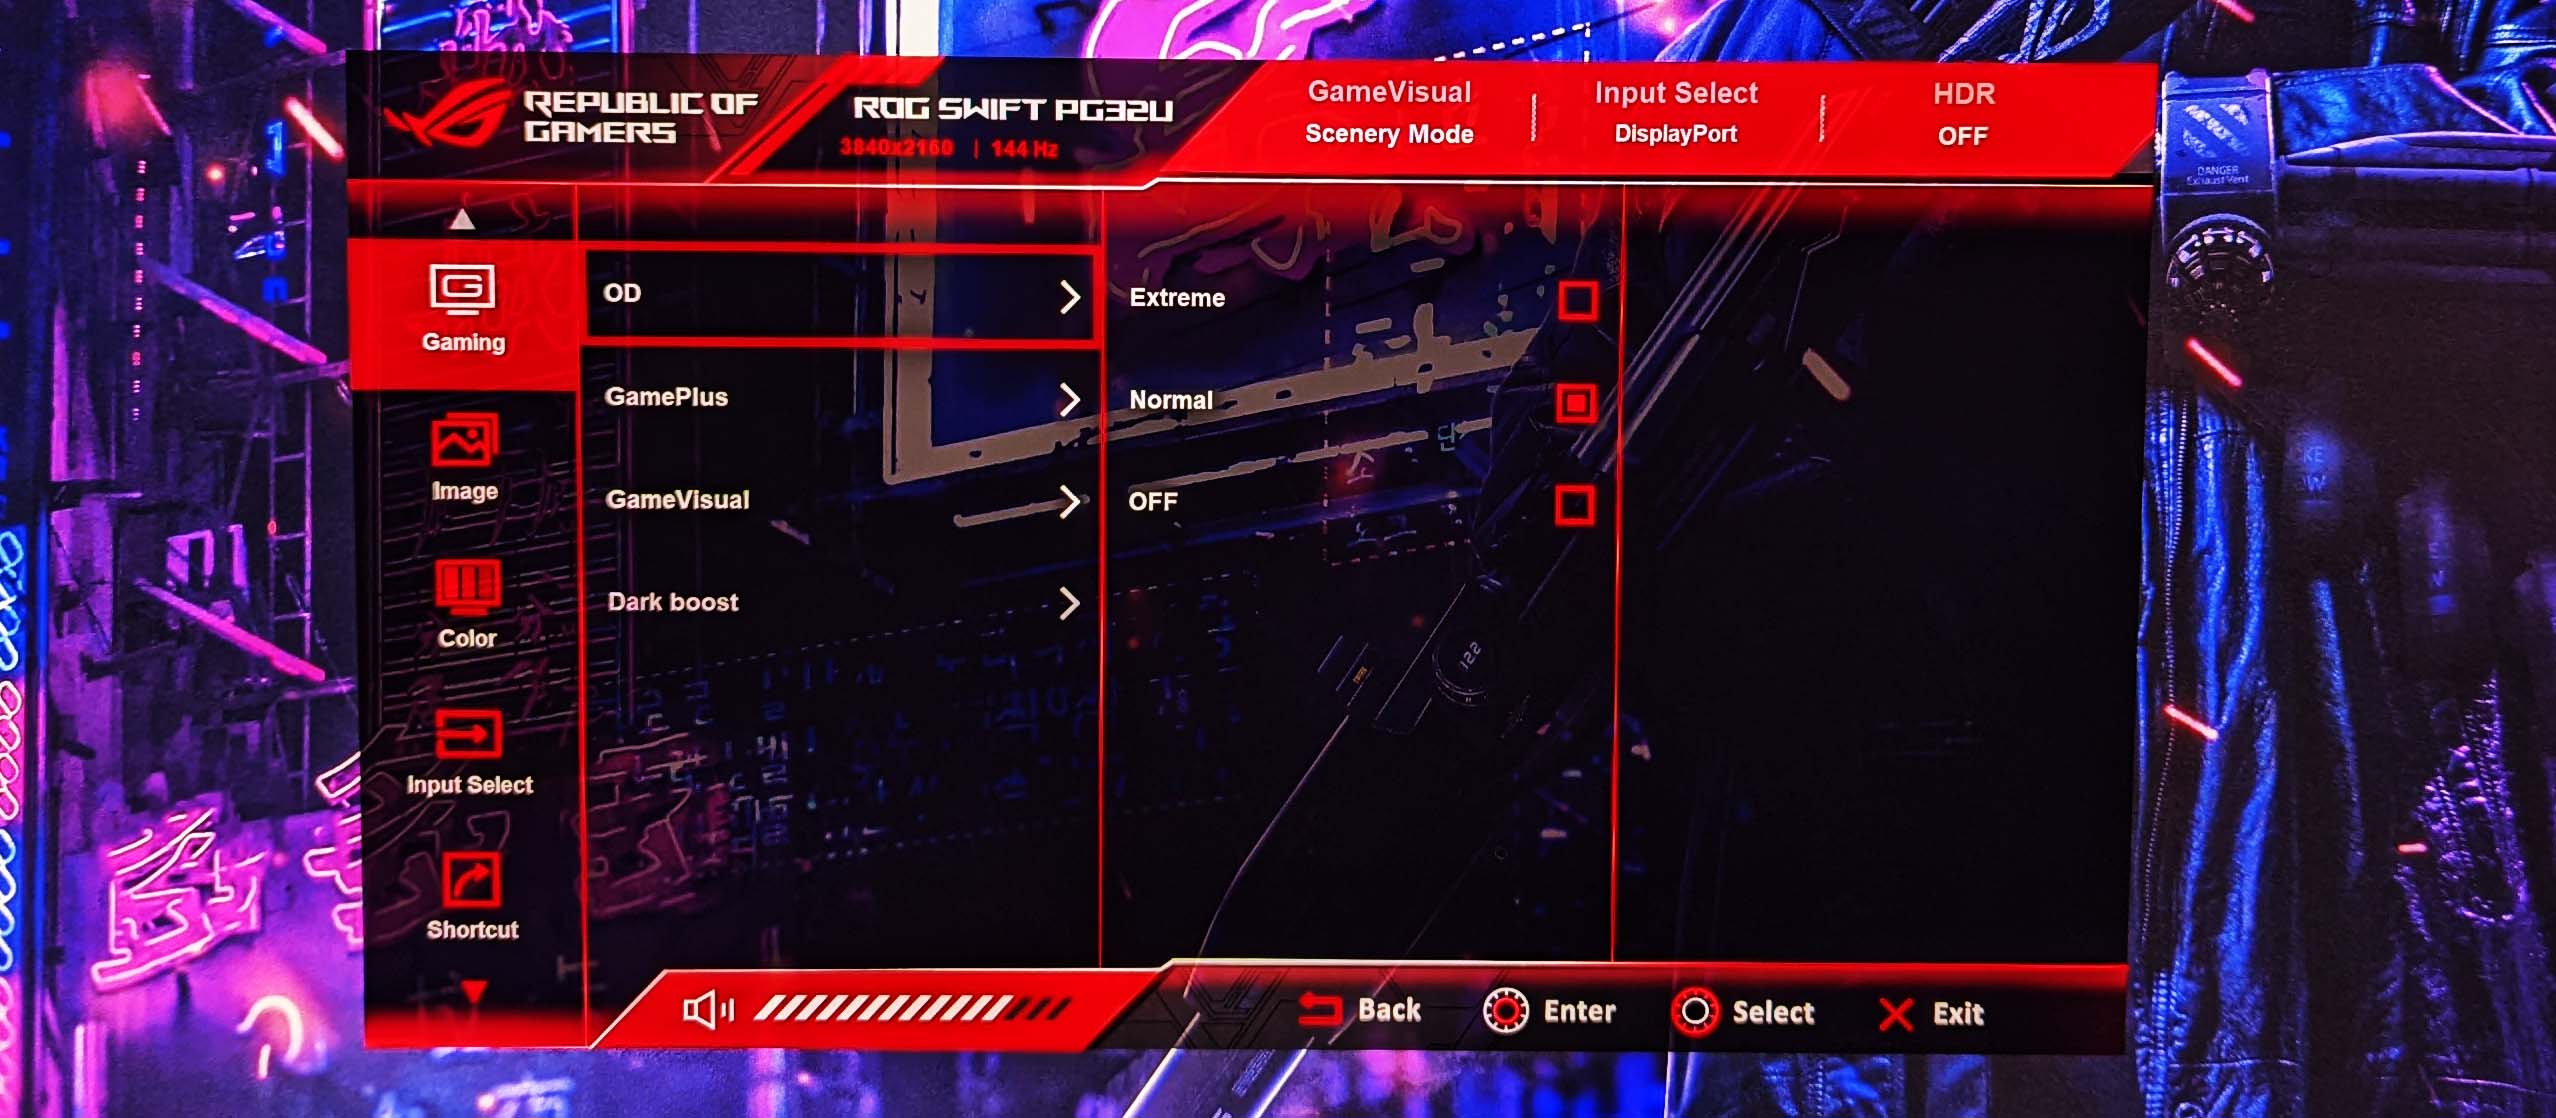 A photo of an ROG monitor's overdrive setting, with three options: Extreme, Normal, and Off.